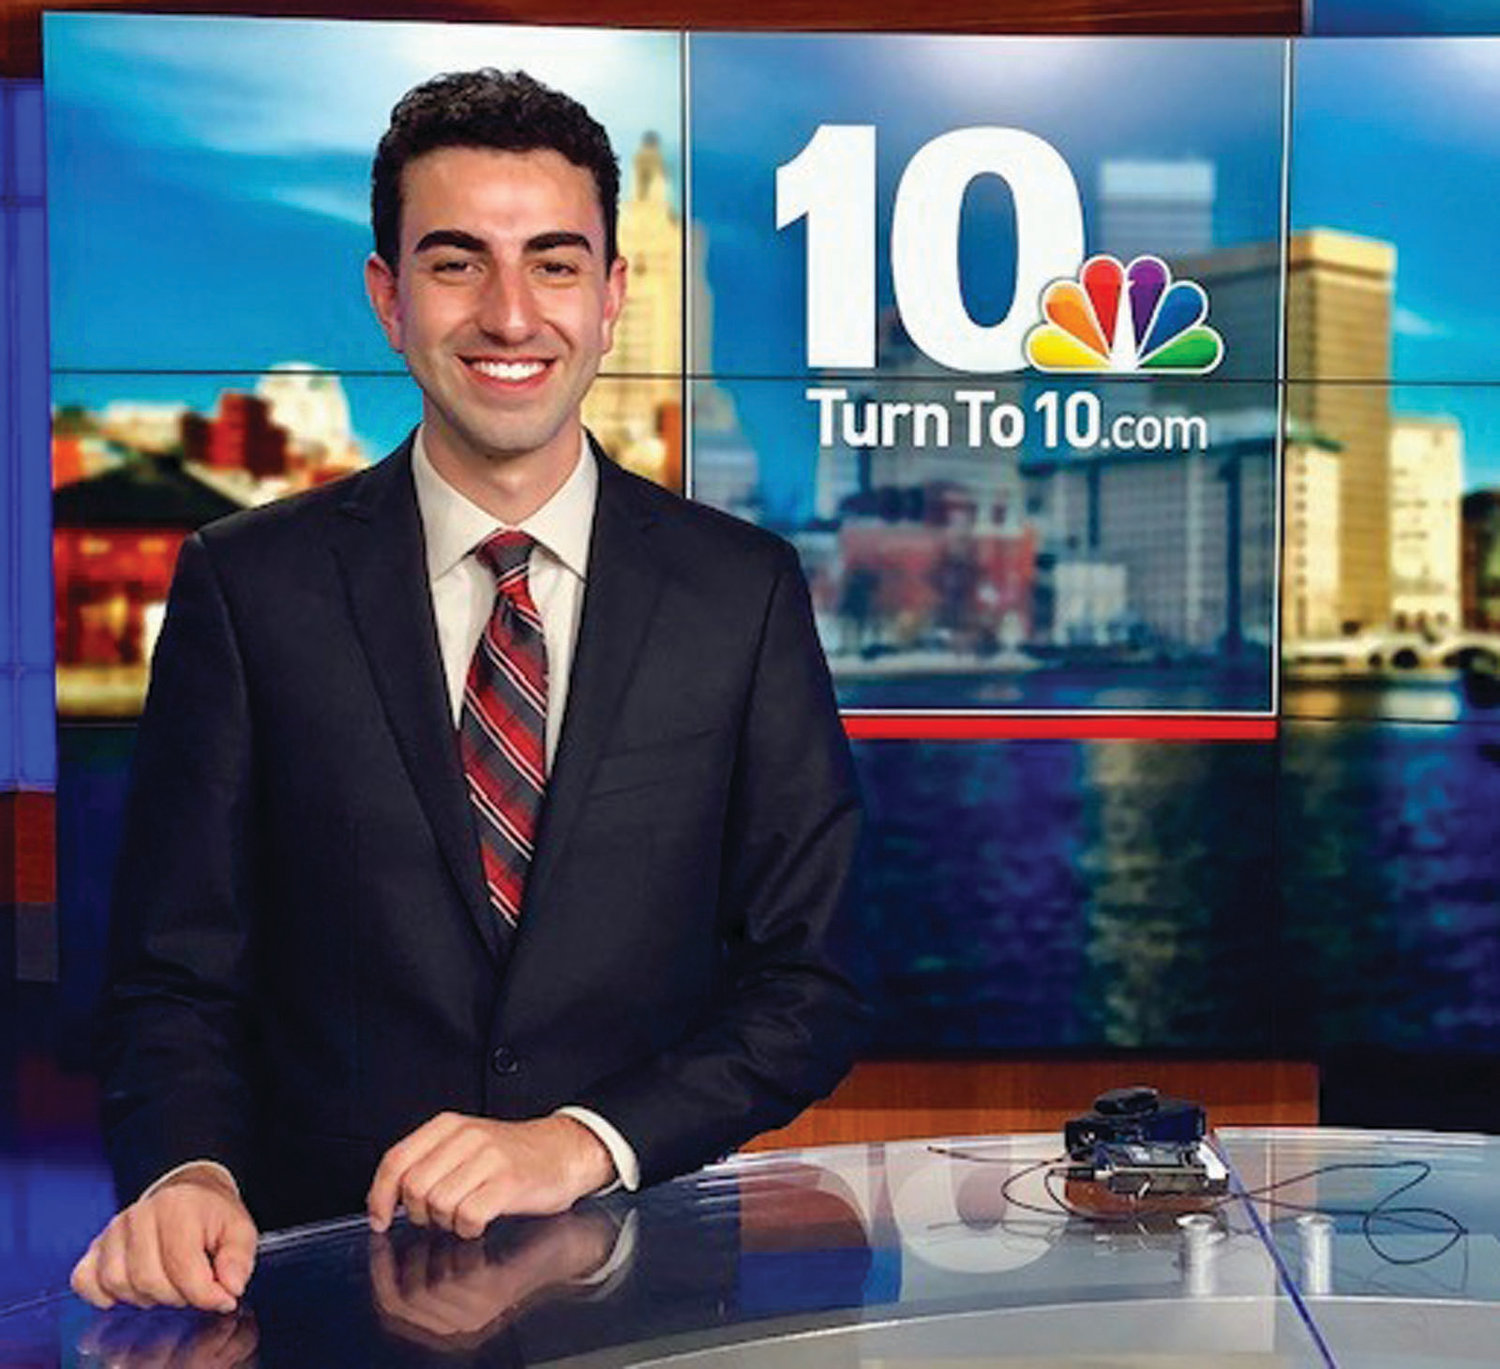 THERE FOR RHODE ISLAND, RAIN OR SHINE: Johnston’s Anthony Macari was recently hired as a digital weather producer and meteorologist at NBC 10 WJAR, helping him achieve his dream of coming home to do what he loves in his home state.